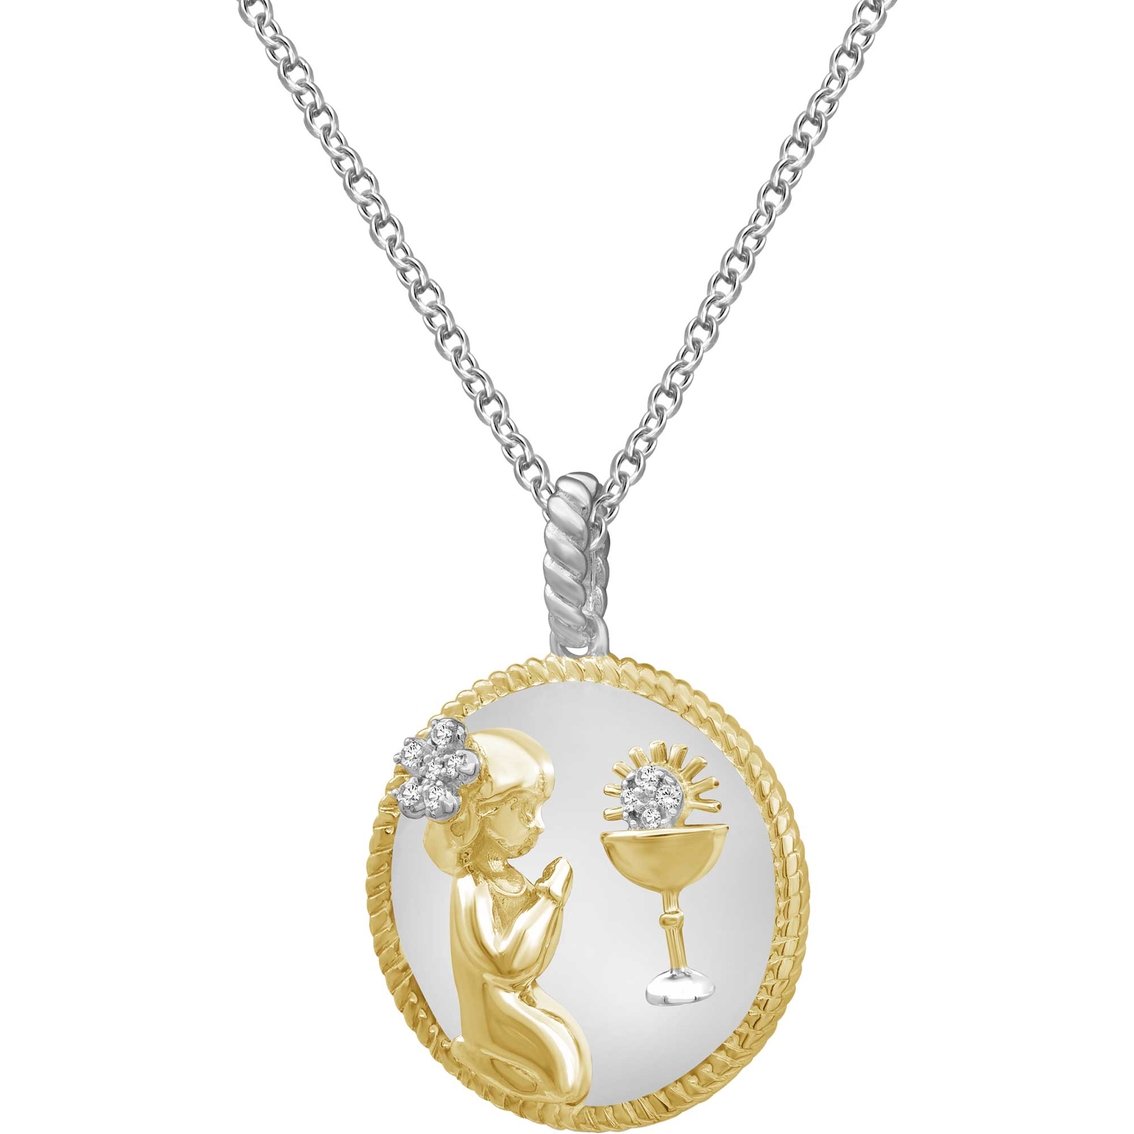 She Shines Sterling Silver and 14K Plated Accent Diamond Religious Pendant - Image 2 of 4